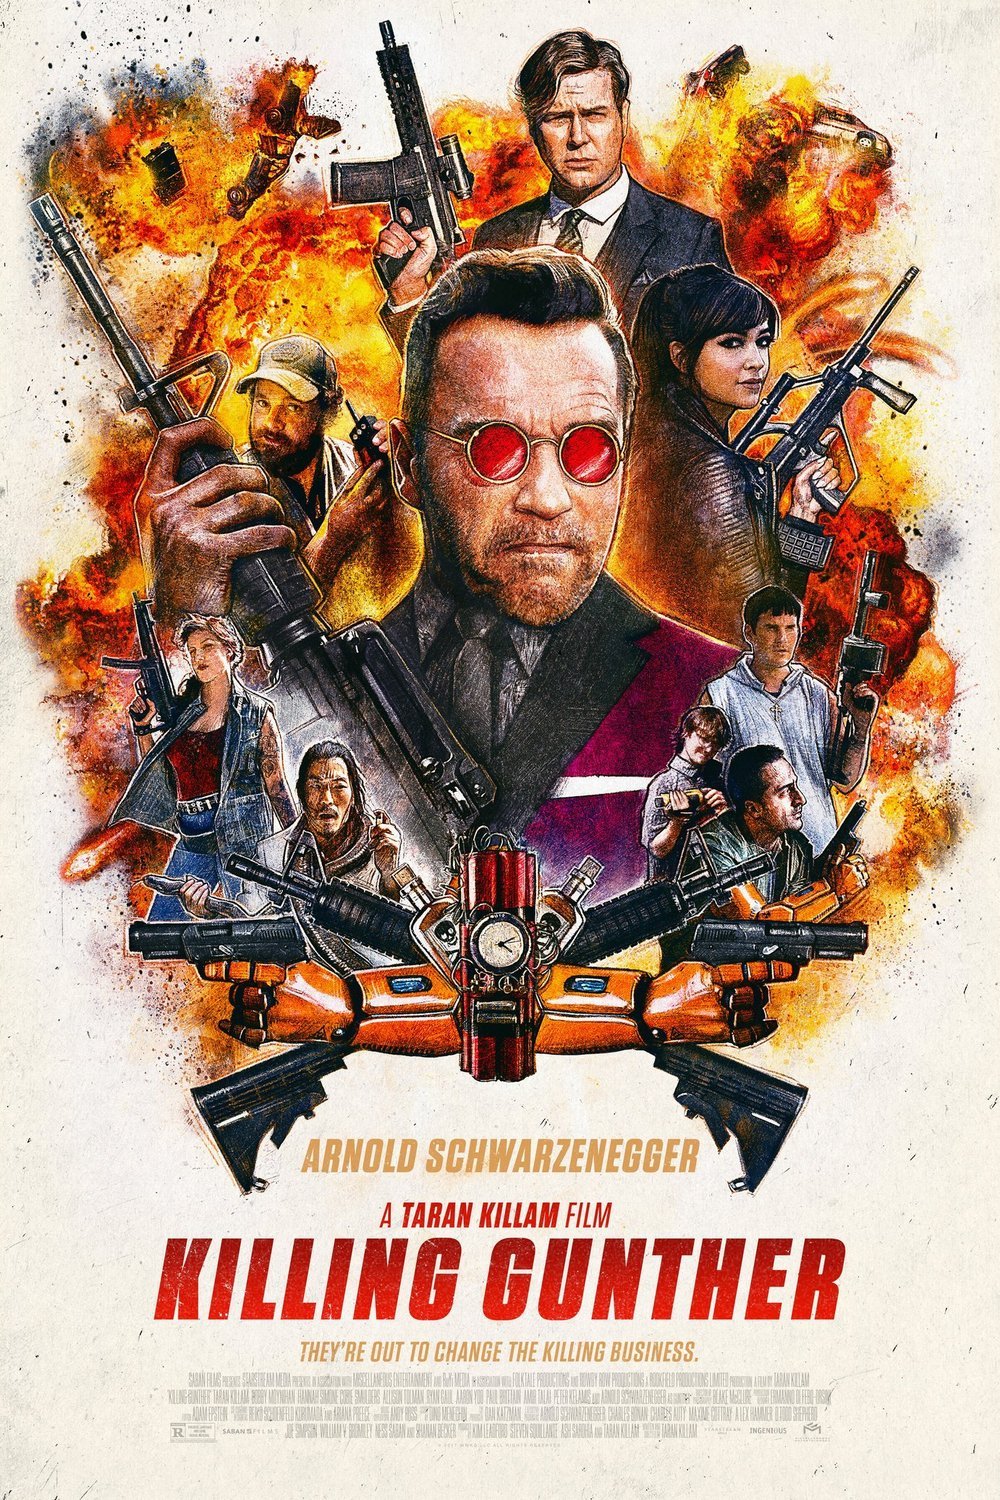 Poster of the movie Killing Gunther